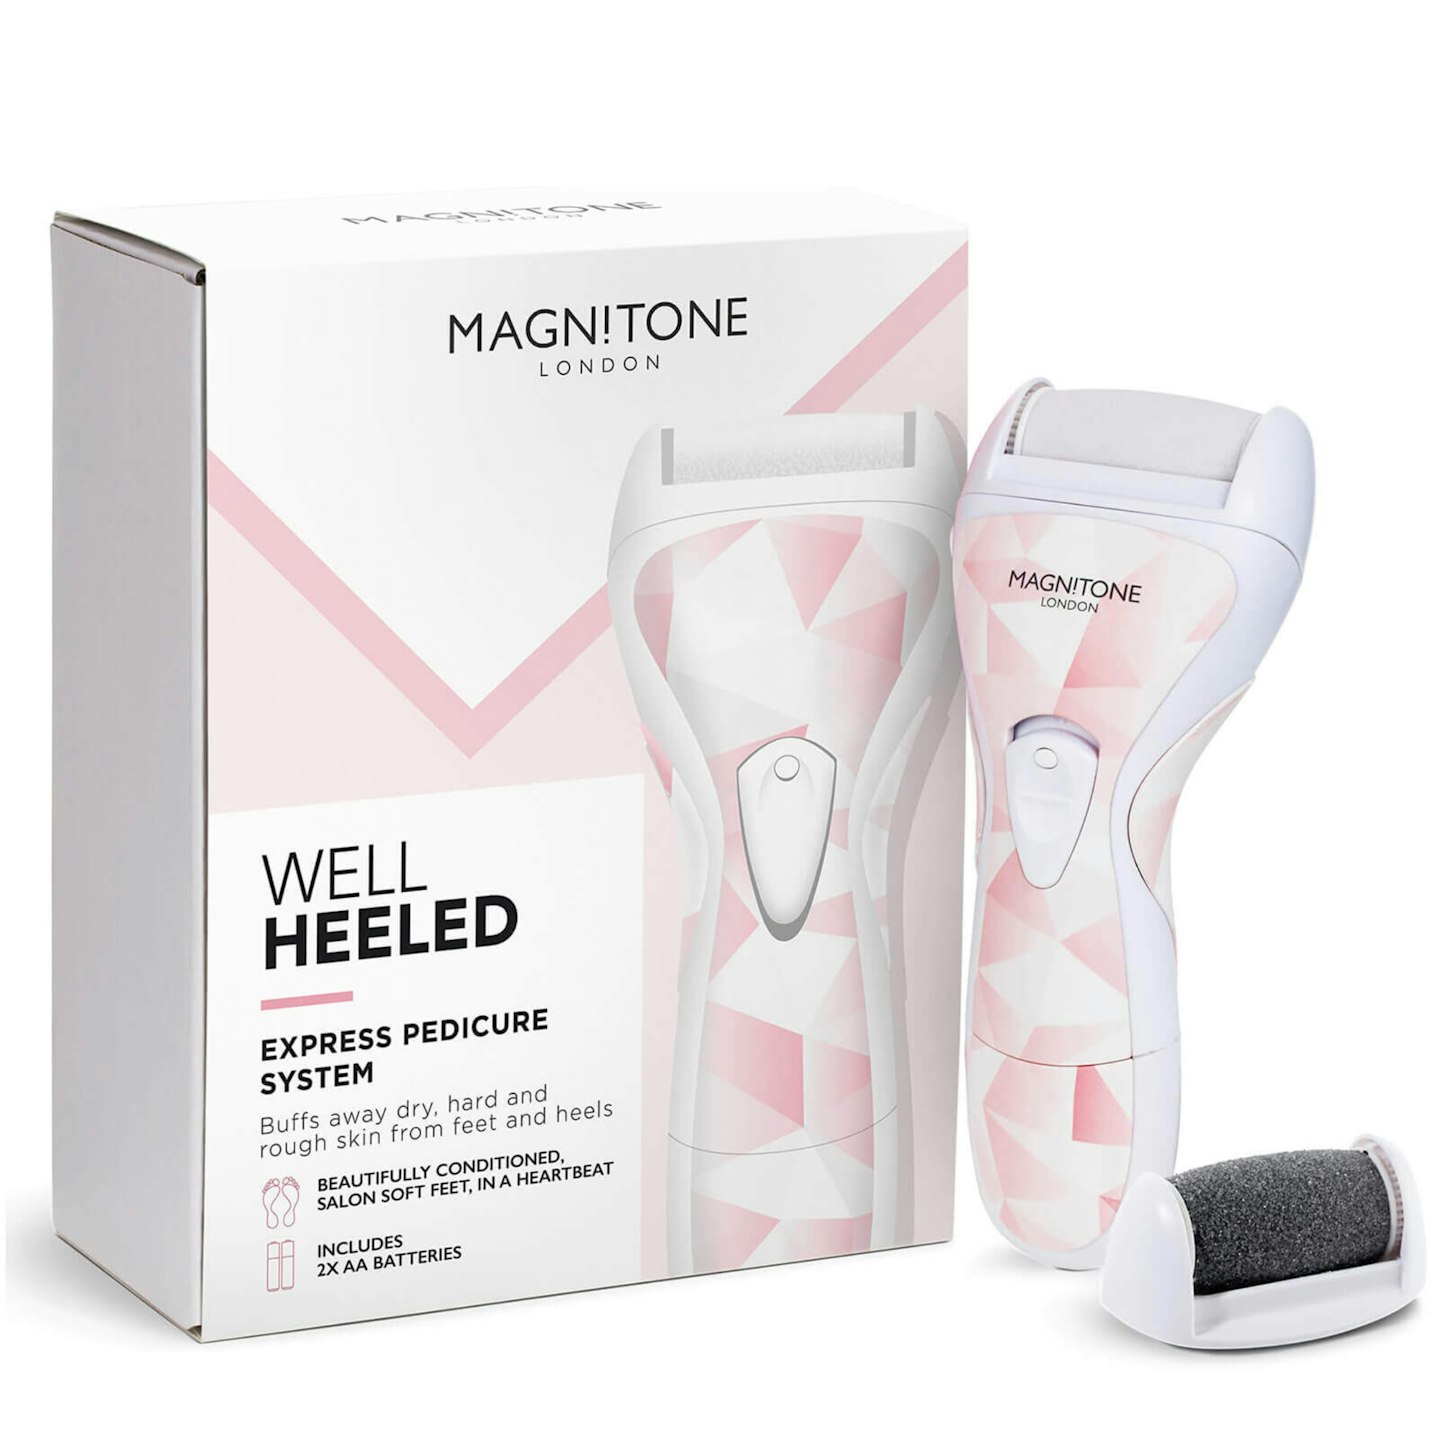 Magnitone London Well Heeled! Express Pedicure System